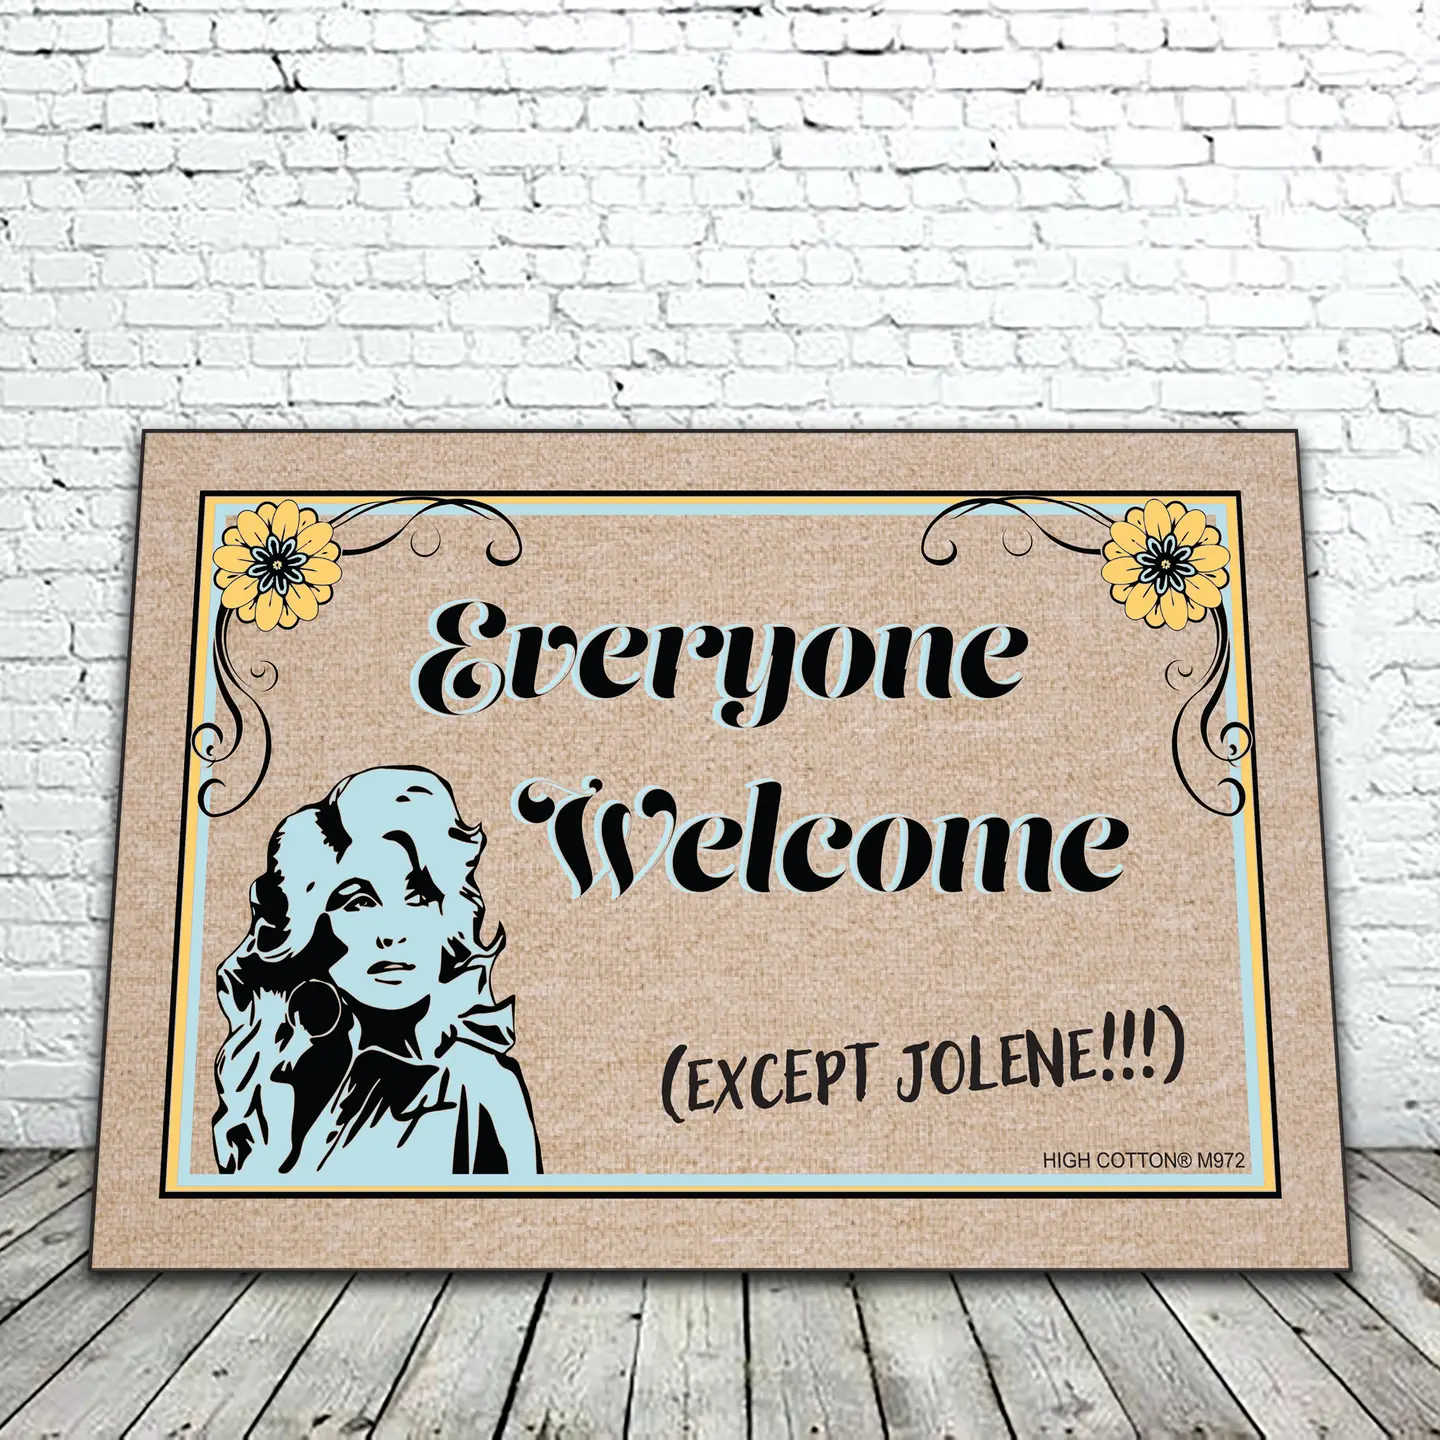 Our doormats are made from 100% olefin® with perfect bound stitched edges and measure 18" x 27".